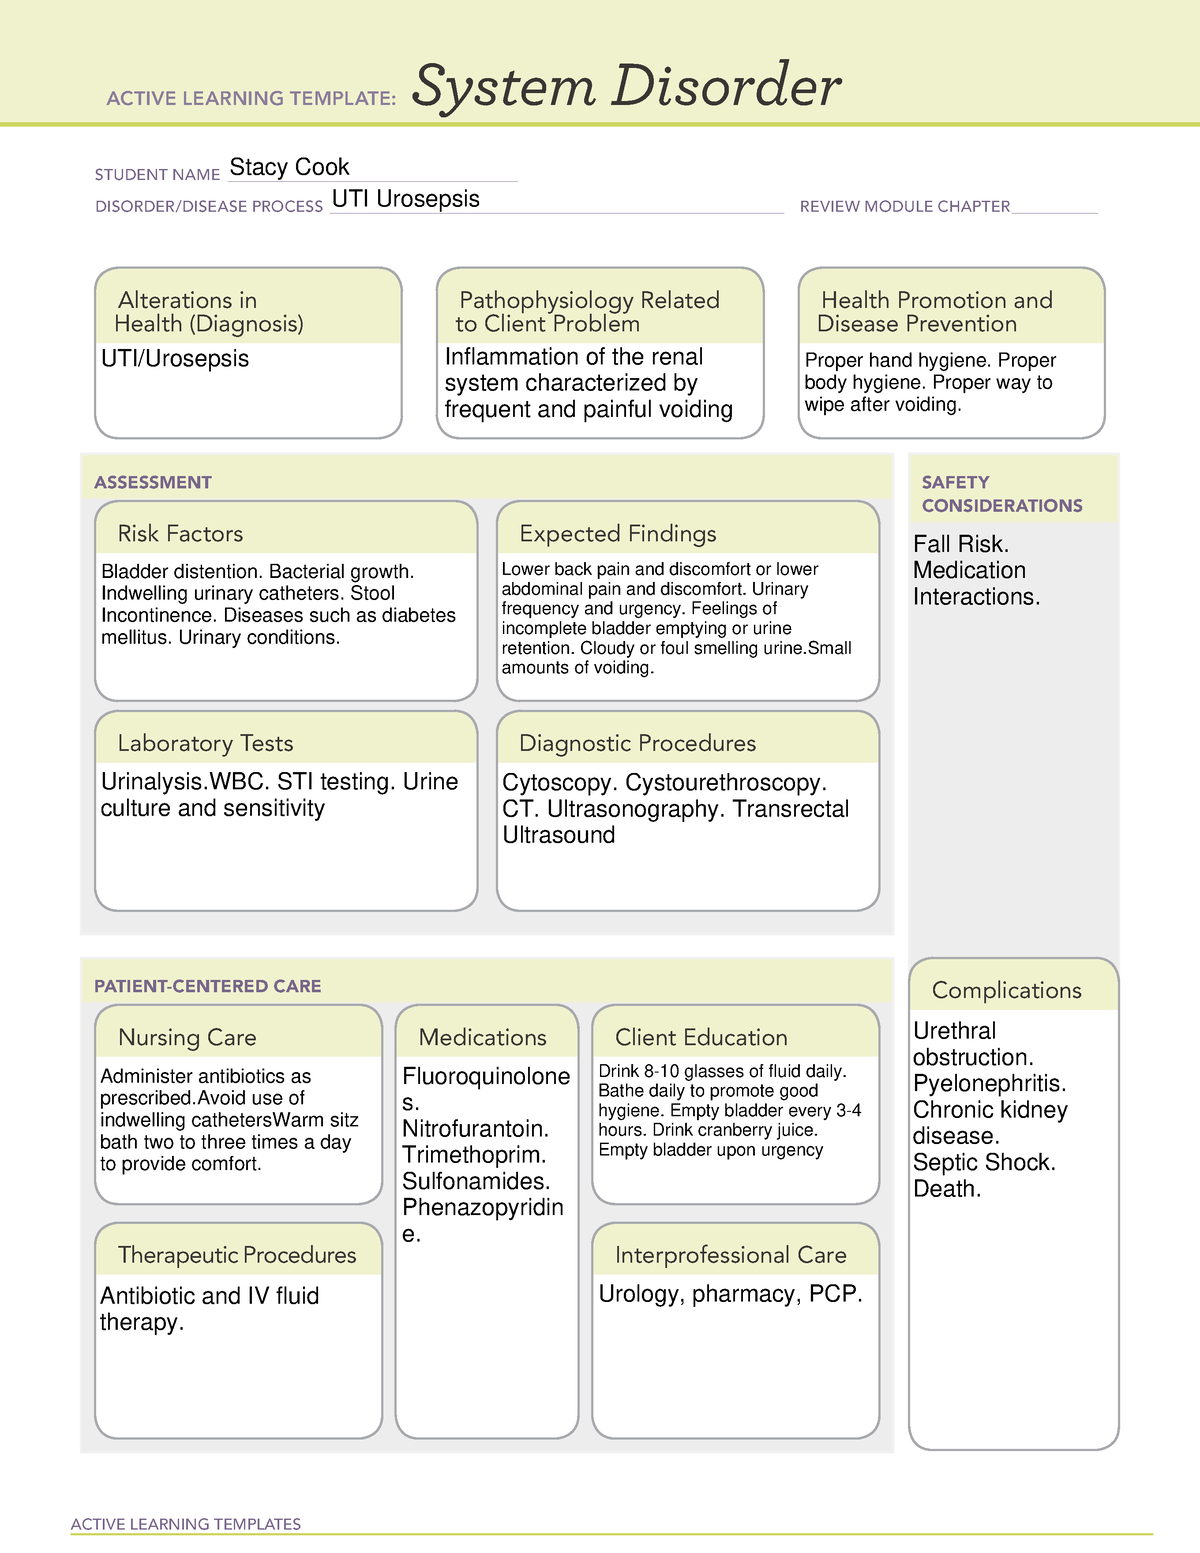 system-disorder-template-uti-urosepsis-active-learning-templates-system-disorder-student-name